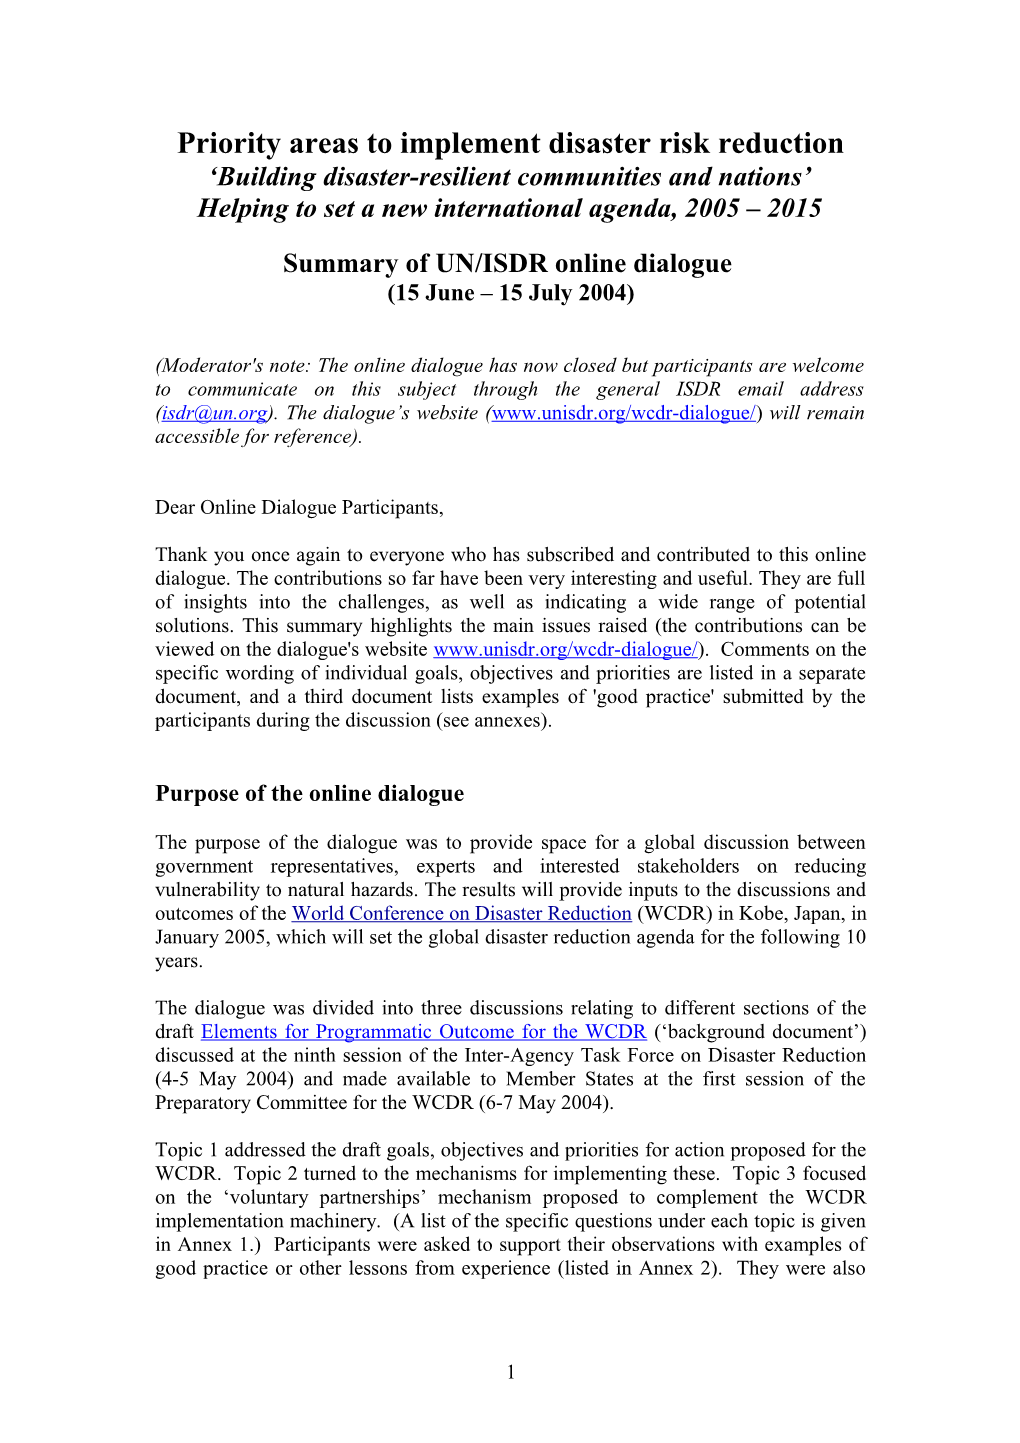 UN/ISDR Online Dialogue: Priority Areas to Implement Disaster Risk Reduction